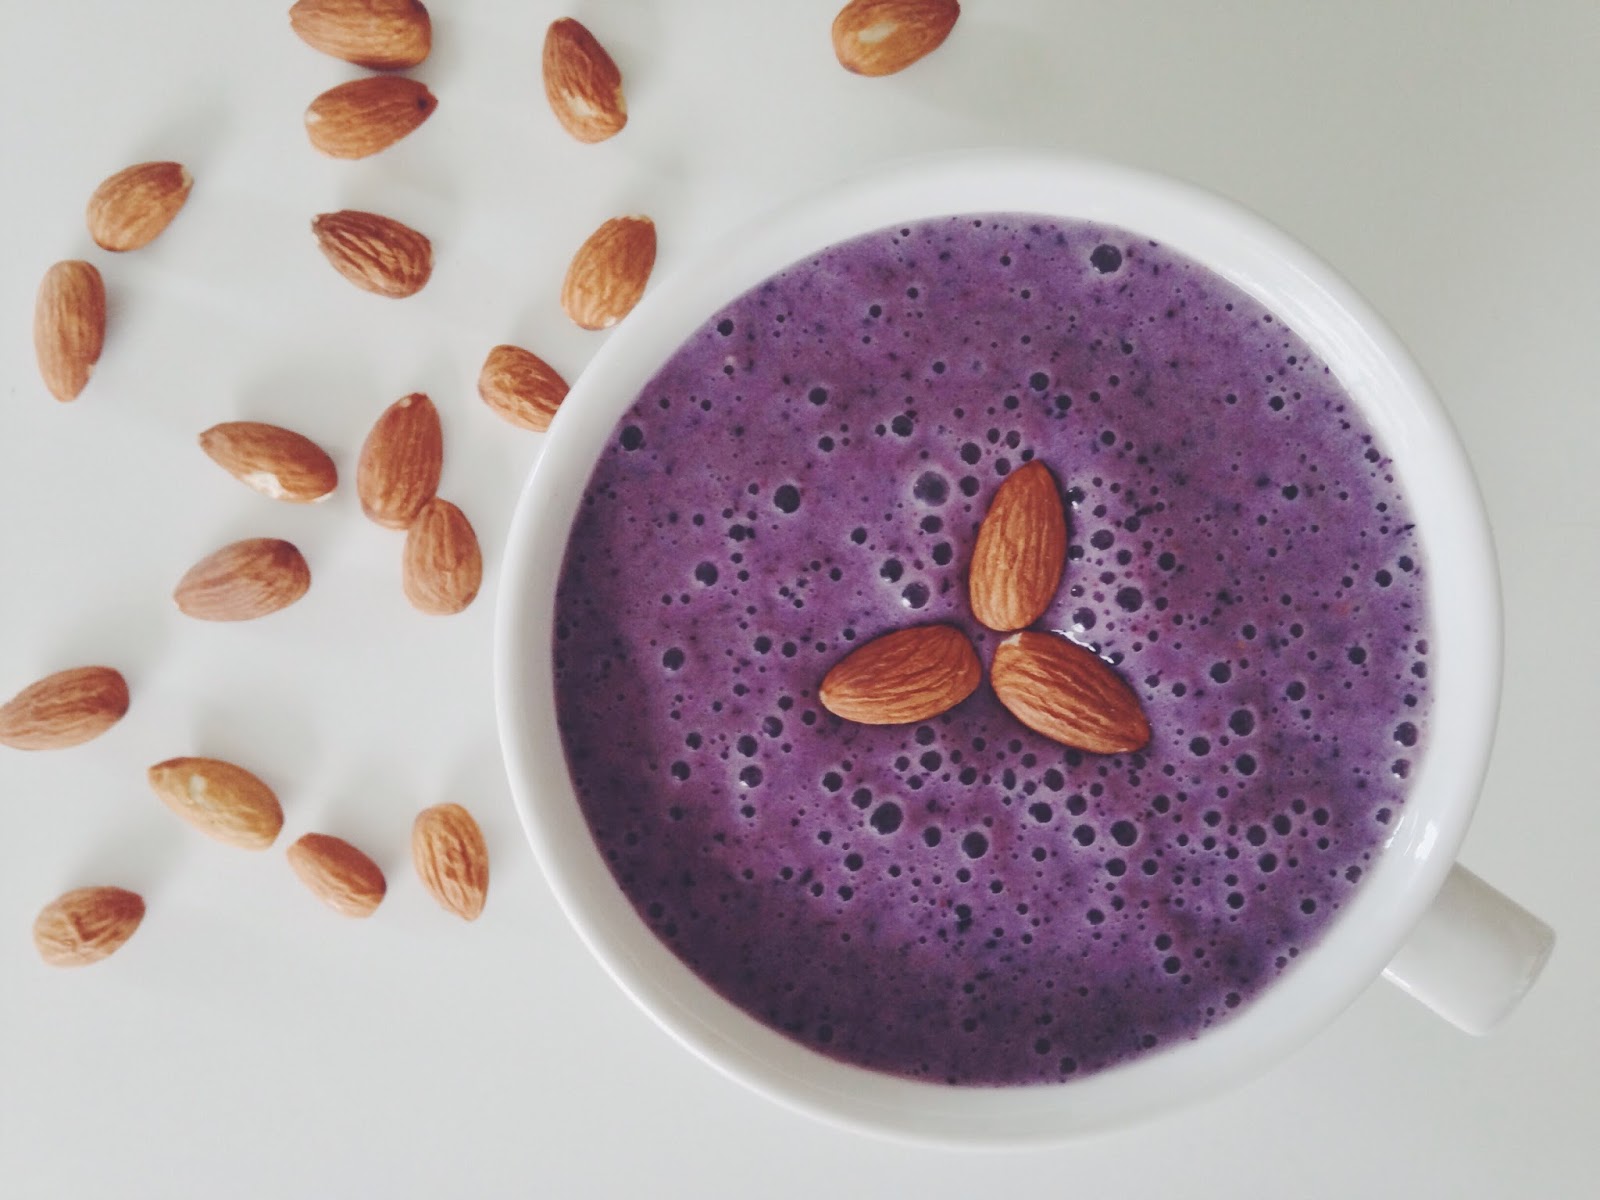 Blueberry and baobab smoothie bowl